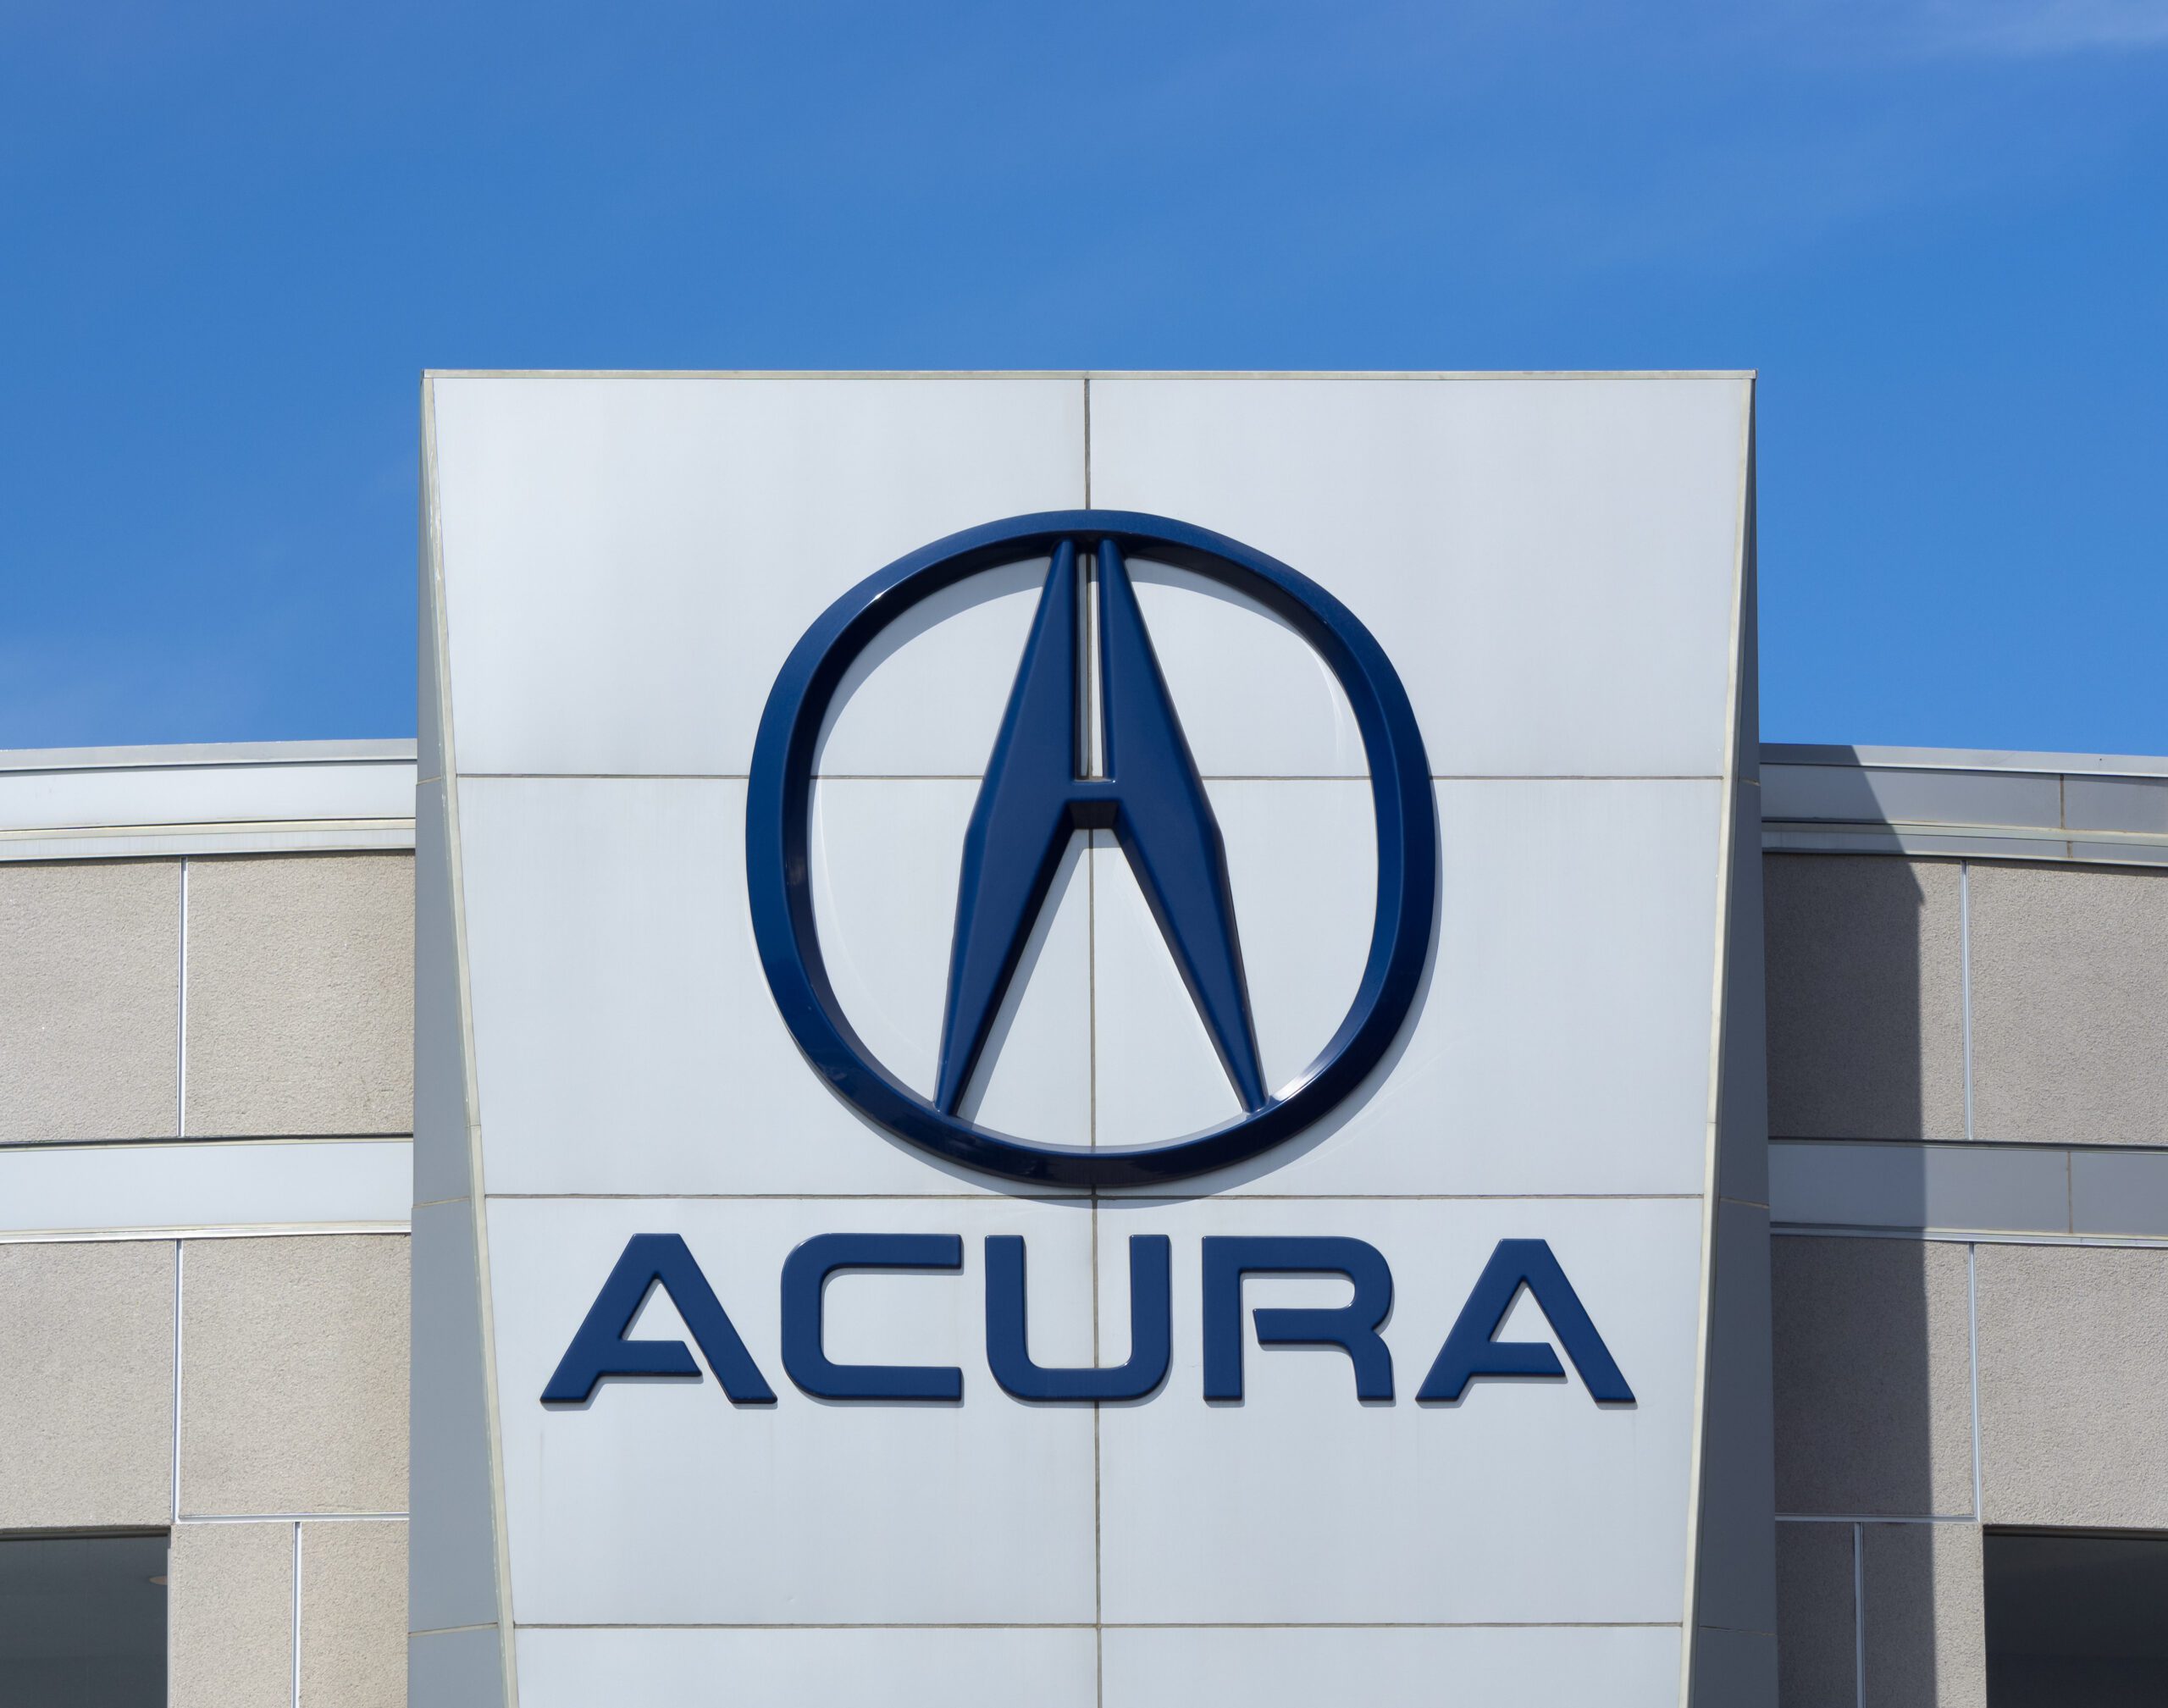 A lawsuit alleges 2019 and 2020 Acura RDX models have defective infotainment systems